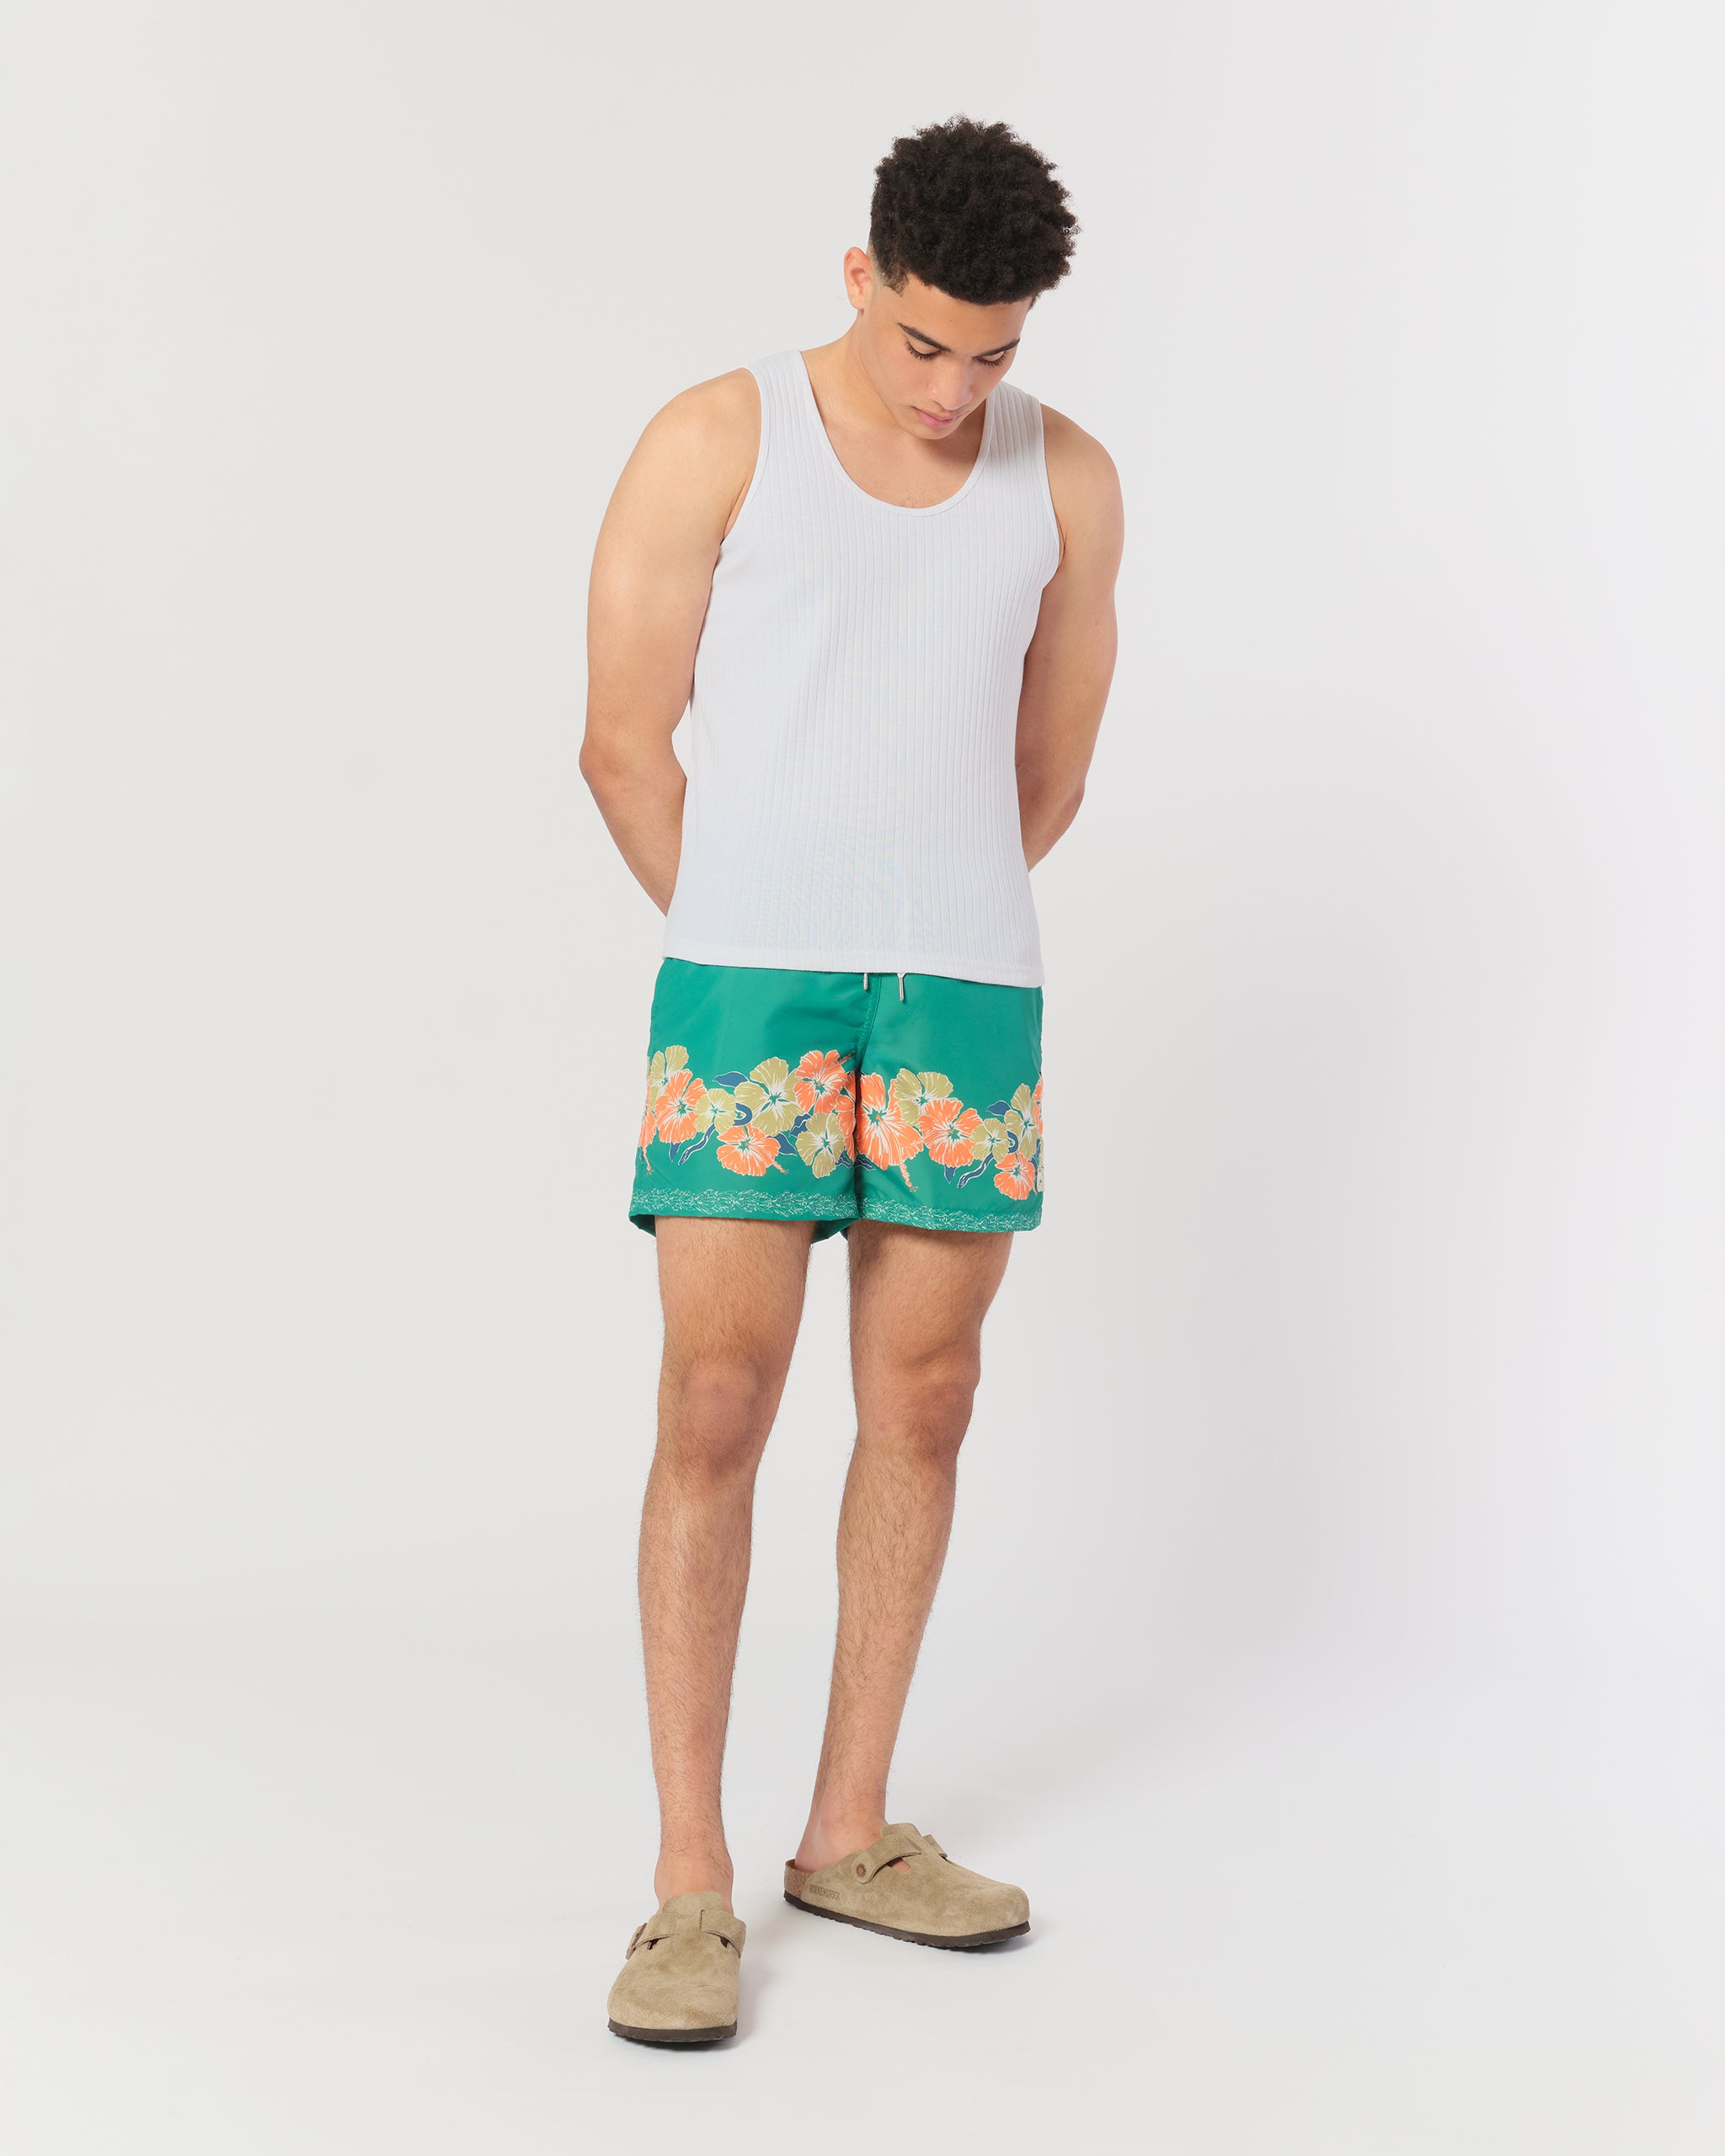 Green swim trunk with floral motif pattern on the bottom of the leg Shot on Model